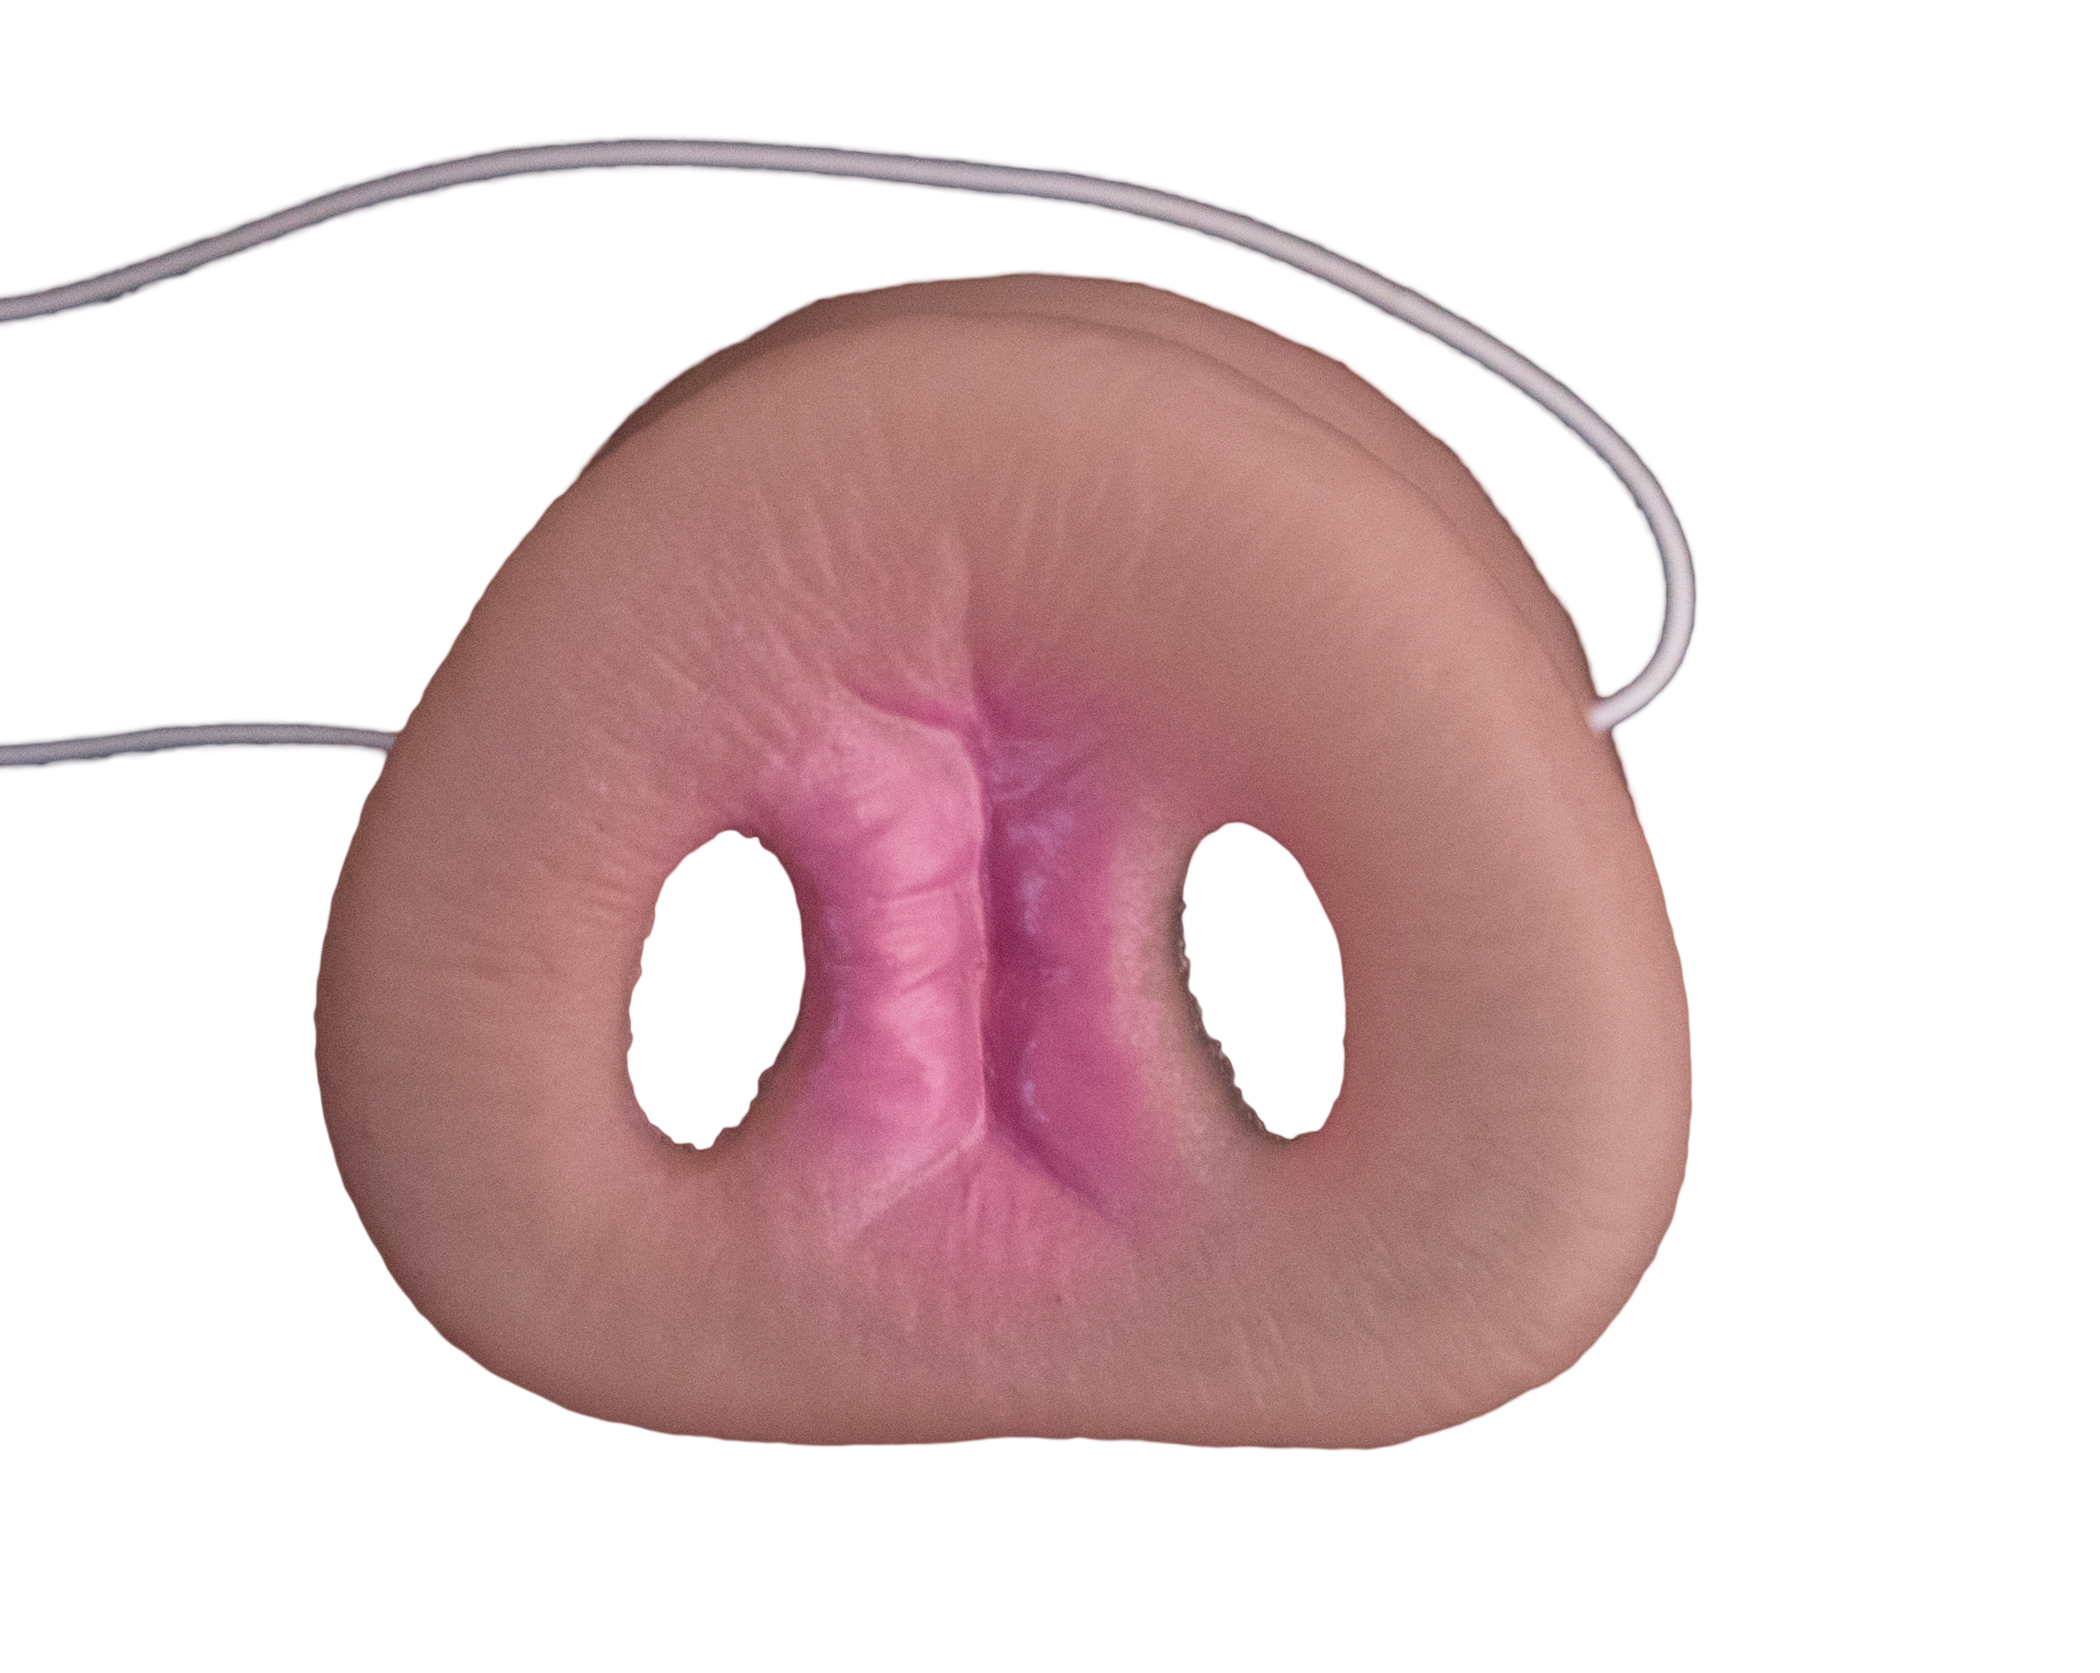 Pig Nose with Elastic Band Adult Halloween Costume Accessory - image 2 of 3